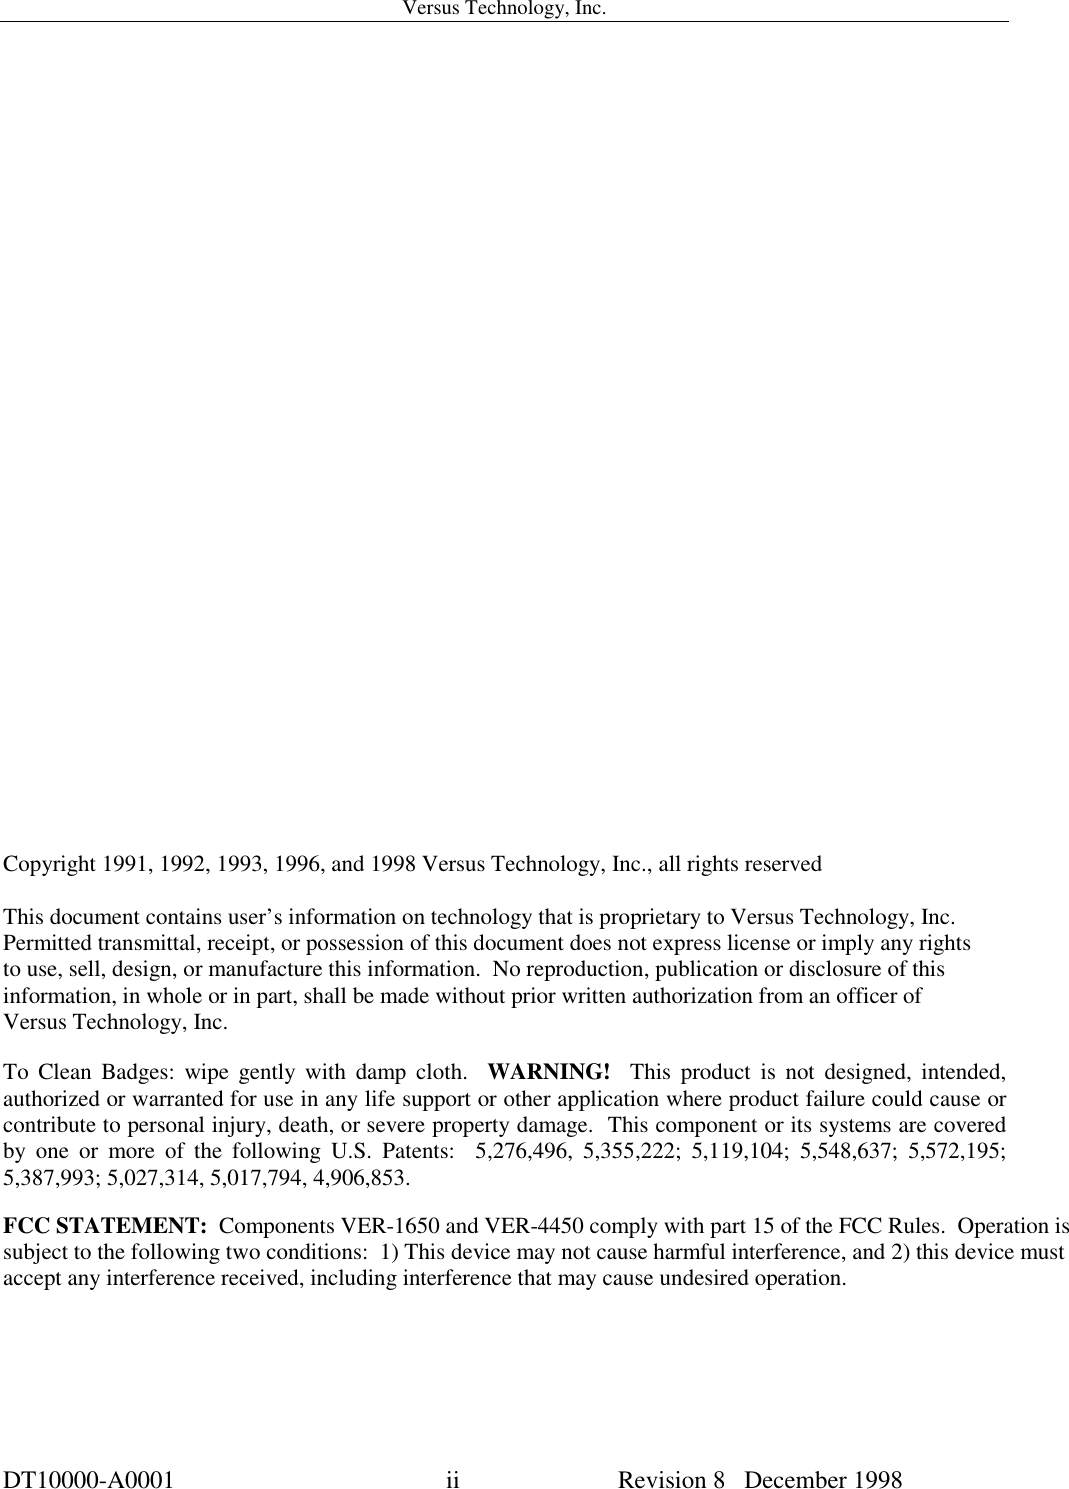 Versus Technology, Inc.DT10000-A0001 ii Revision 8   December 1998Copyright 1991, 1992, 1993, 1996, and 1998 Versus Technology, Inc., all rights reservedThis document contains user’s information on technology that is proprietary to Versus Technology, Inc.Permitted transmittal, receipt, or possession of this document does not express license or imply any rightsto use, sell, design, or manufacture this information.  No reproduction, publication or disclosure of thisinformation, in whole or in part, shall be made without prior written authorization from an officer ofVersus Technology, Inc.To Clean Badges: wipe gently with damp cloth.  WARNING!  This product is not designed, intended,authorized or warranted for use in any life support or other application where product failure could cause orcontribute to personal injury, death, or severe property damage.  This component or its systems are coveredby one or more of the following U.S. Patents:  5,276,496, 5,355,222; 5,119,104; 5,548,637; 5,572,195;5,387,993; 5,027,314, 5,017,794, 4,906,853.FCC STATEMENT:  Components VER-1650 and VER-4450 comply with part 15 of the FCC Rules.  Operation issubject to the following two conditions:  1) This device may not cause harmful interference, and 2) this device mustaccept any interference received, including interference that may cause undesired operation.